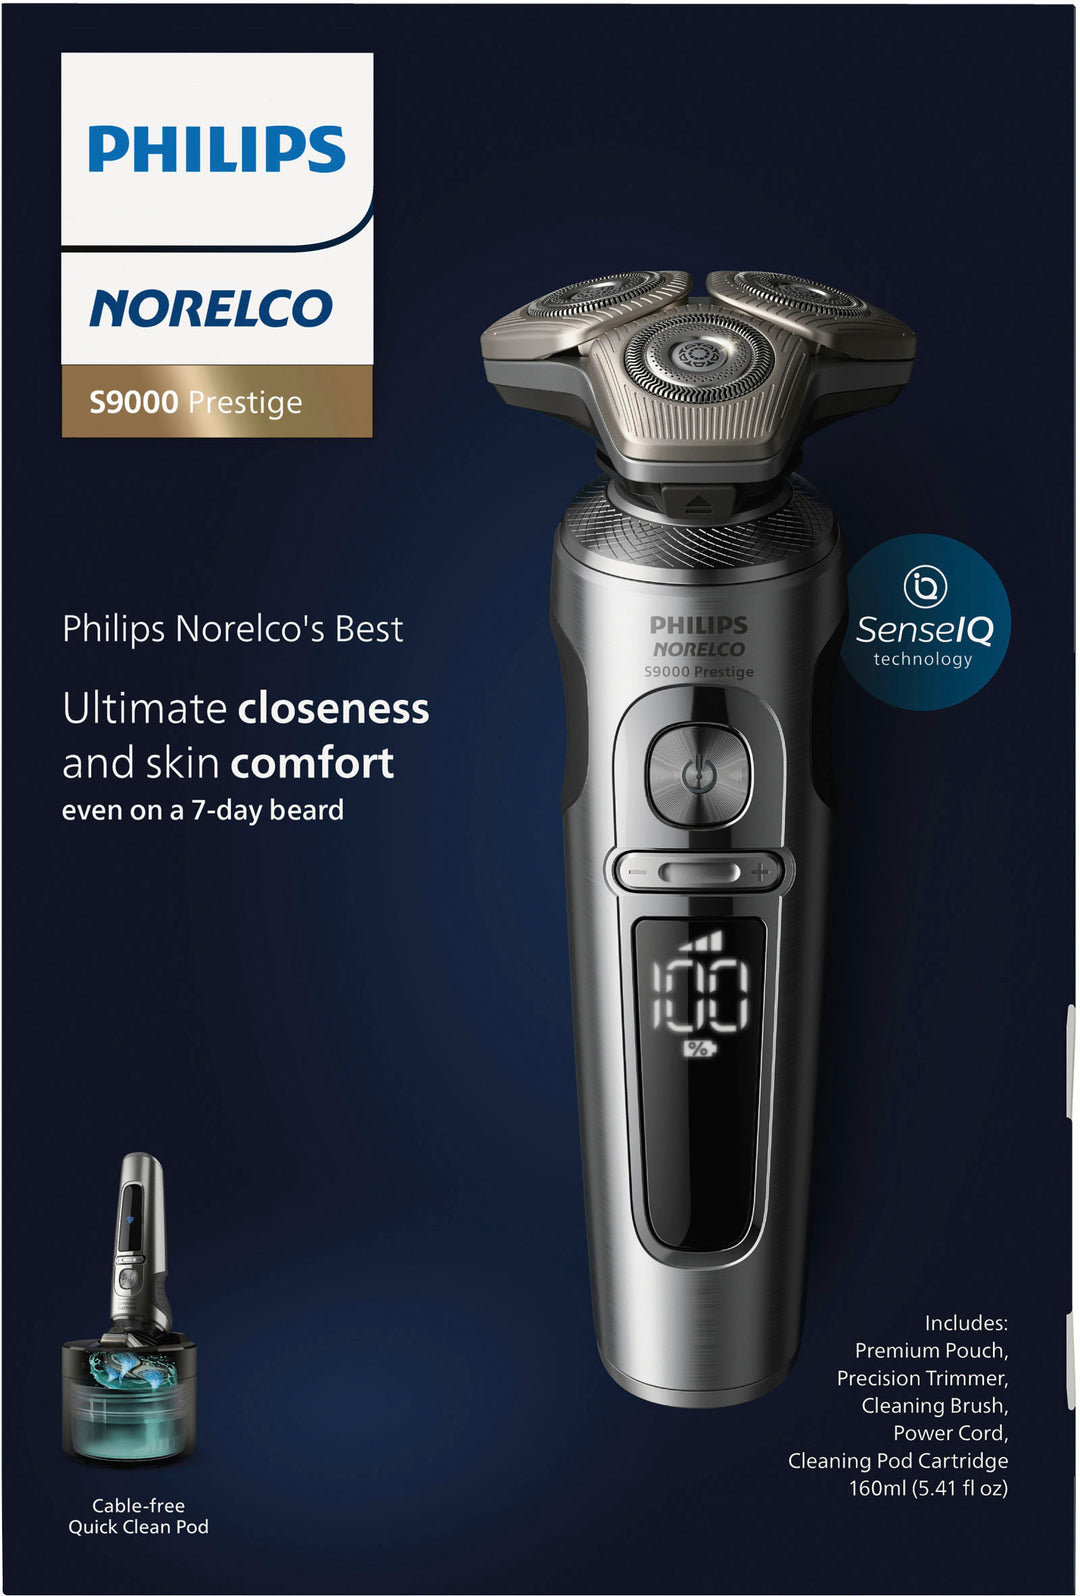 Philips Norelco S9000 Prestige Rechargeable Wet & Dry Shaver with Precision Trimmer and Premium Case, SP9841/84 - Light Brushed Chrome_3